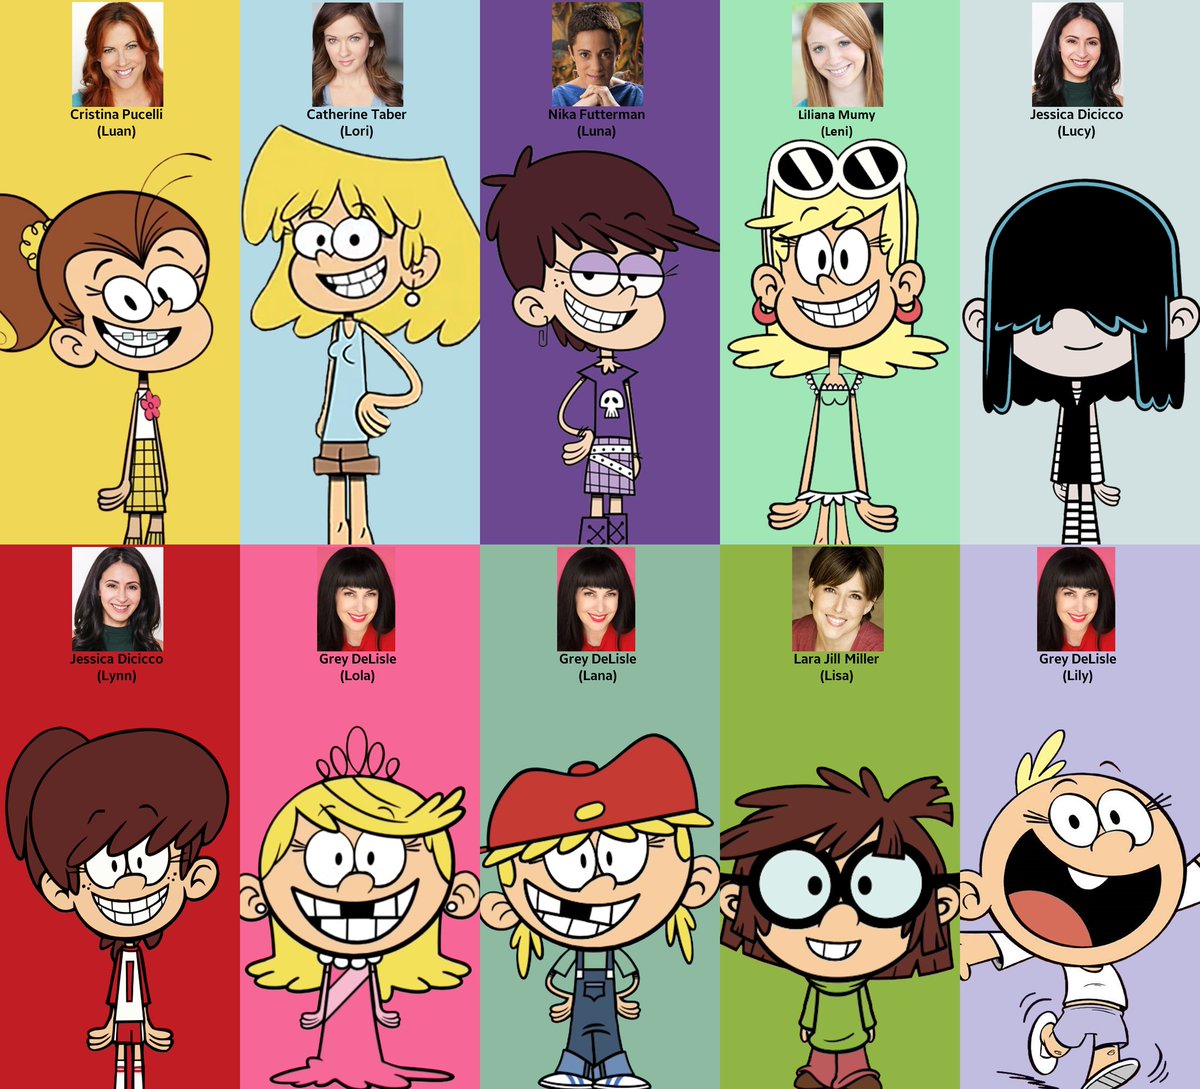 This is for the voice actresses of The Loud Sisters. Hope they'll love it. @CPucelli, @cattaber, @Nika_Futterman, @lilianamumy1, @jessicadicicco, @GreyDeLisle and @LaraJillMiller are...The Loud Sisters! #LoudHouse